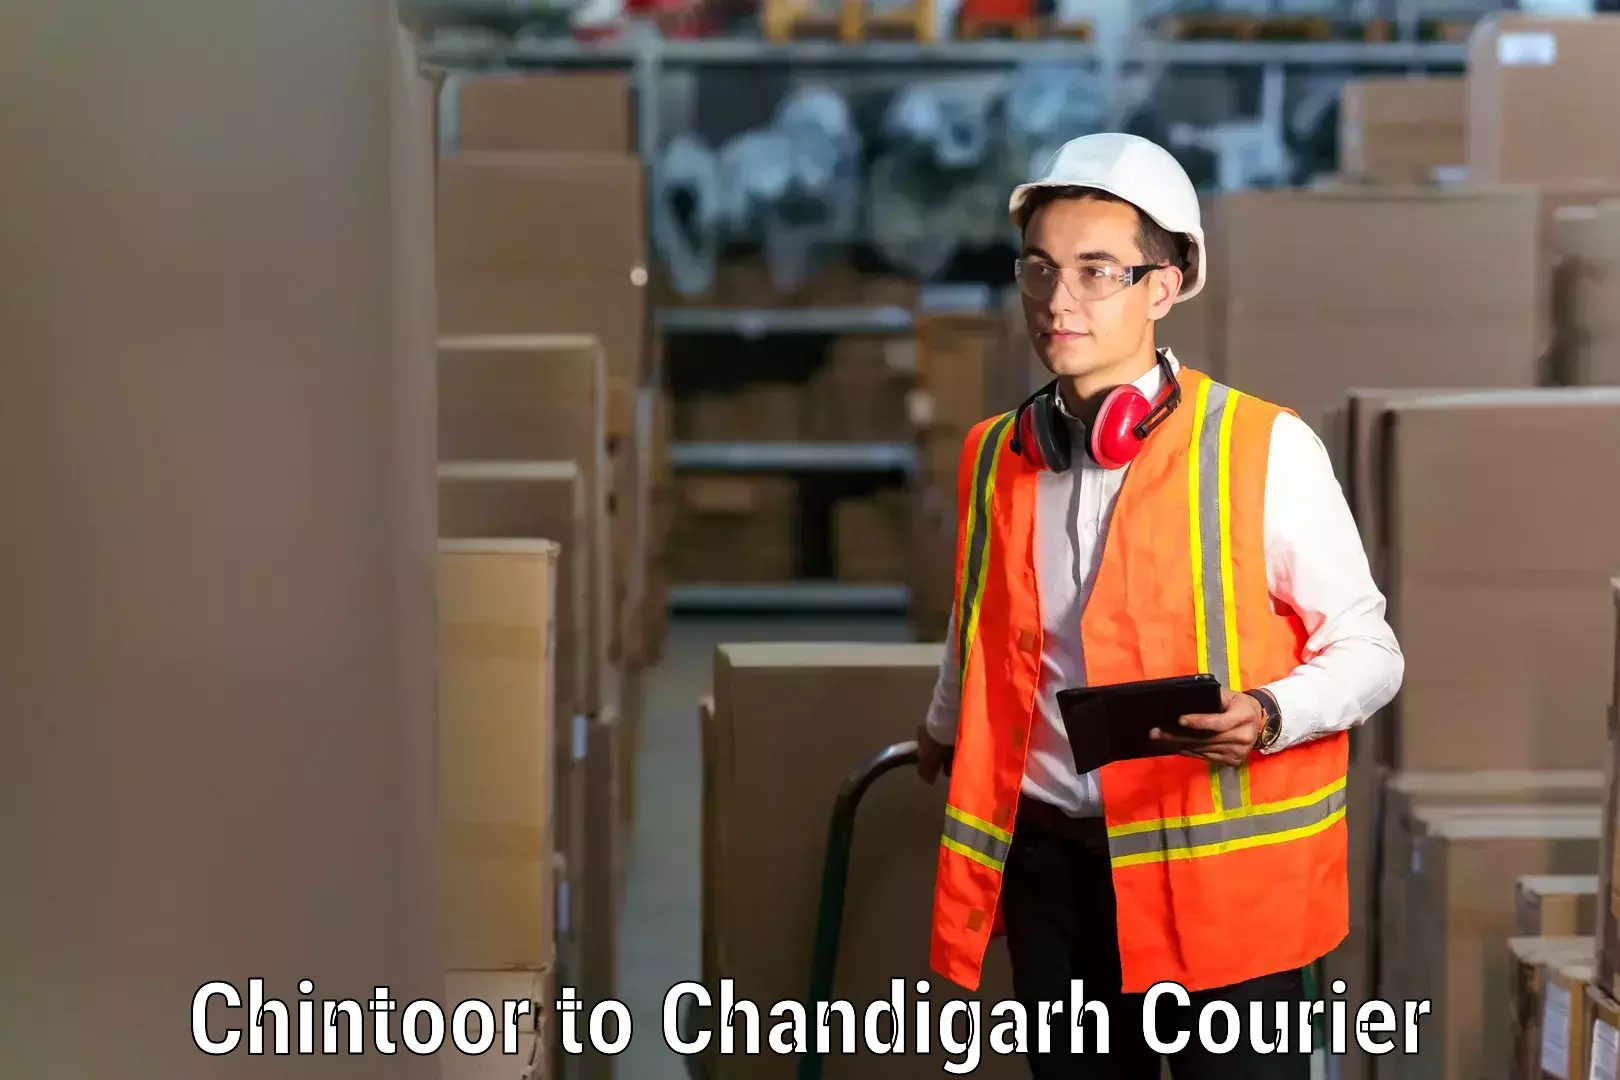 Furniture transport specialists Chintoor to Chandigarh